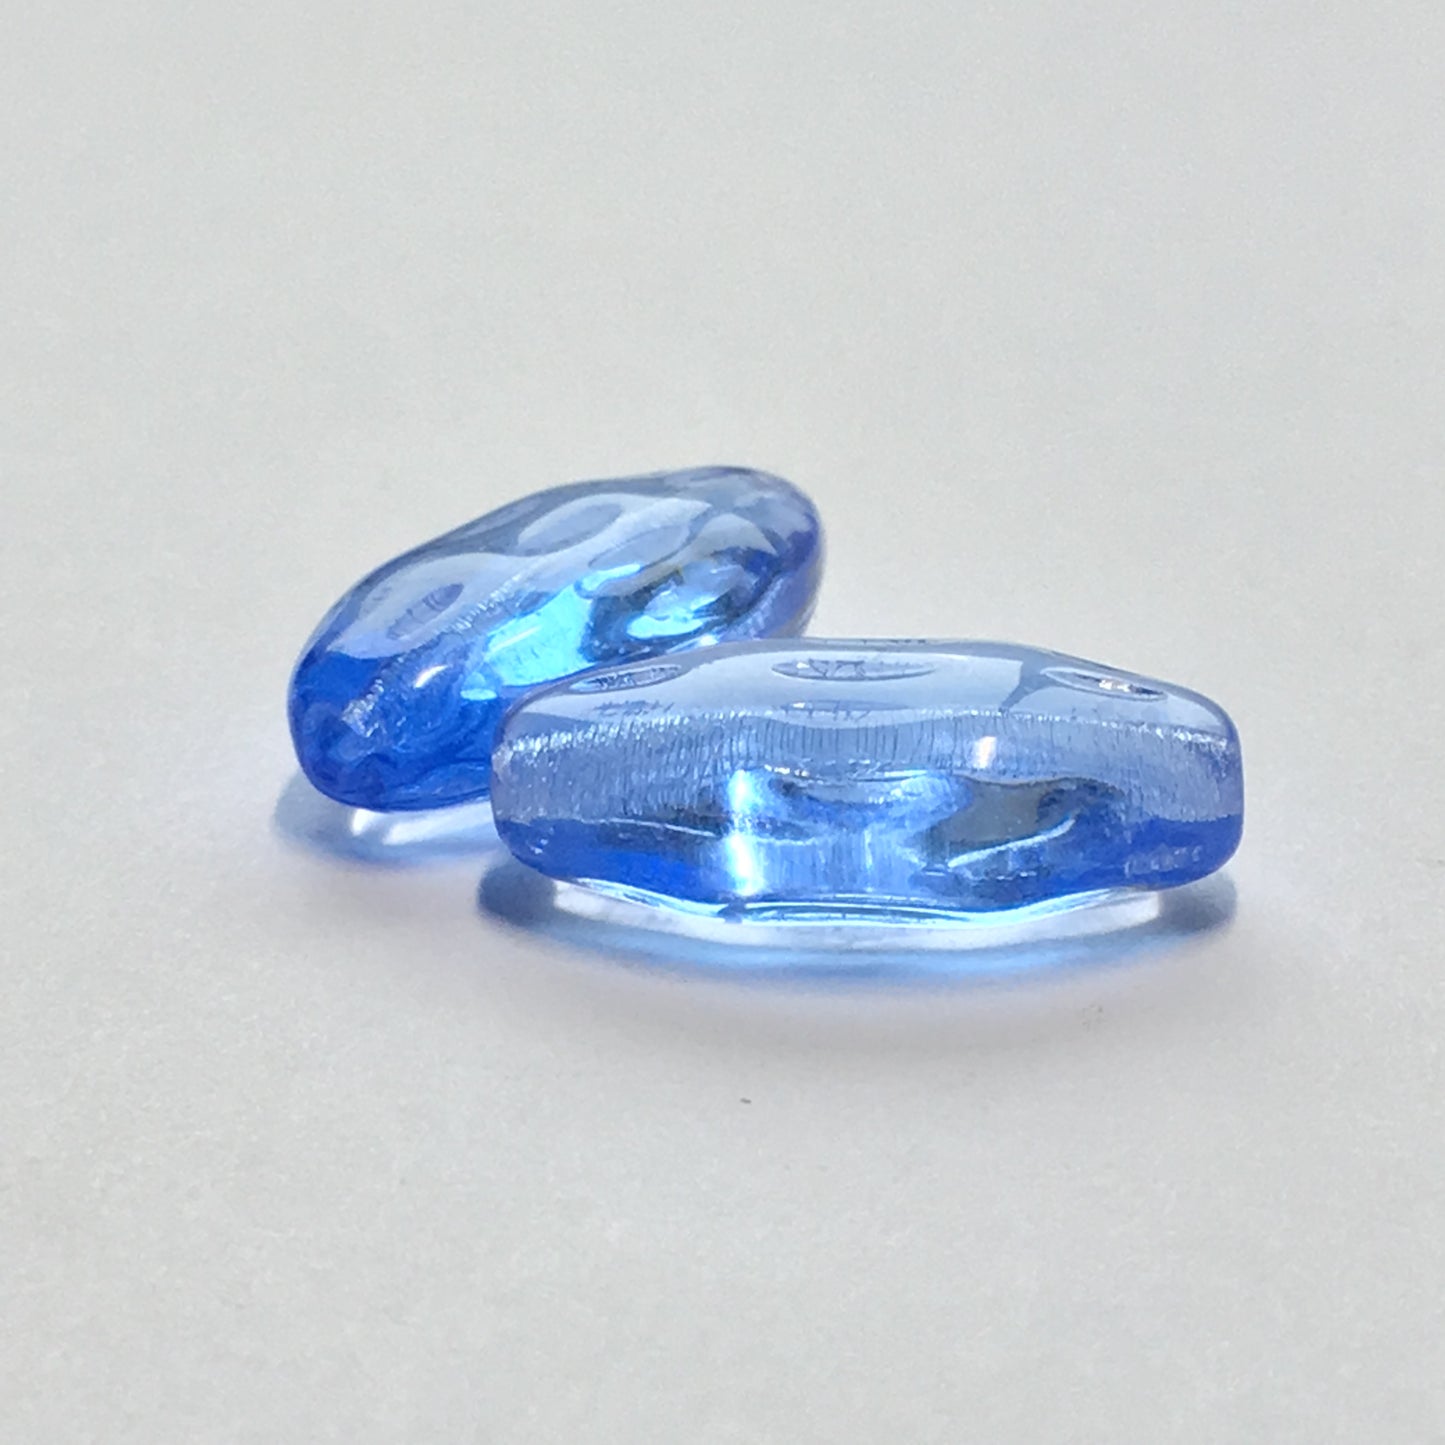 Transparent Blue Dimpled Almond Flat Oval Beads, 20 x 11 x 6 mm - 2 Beads